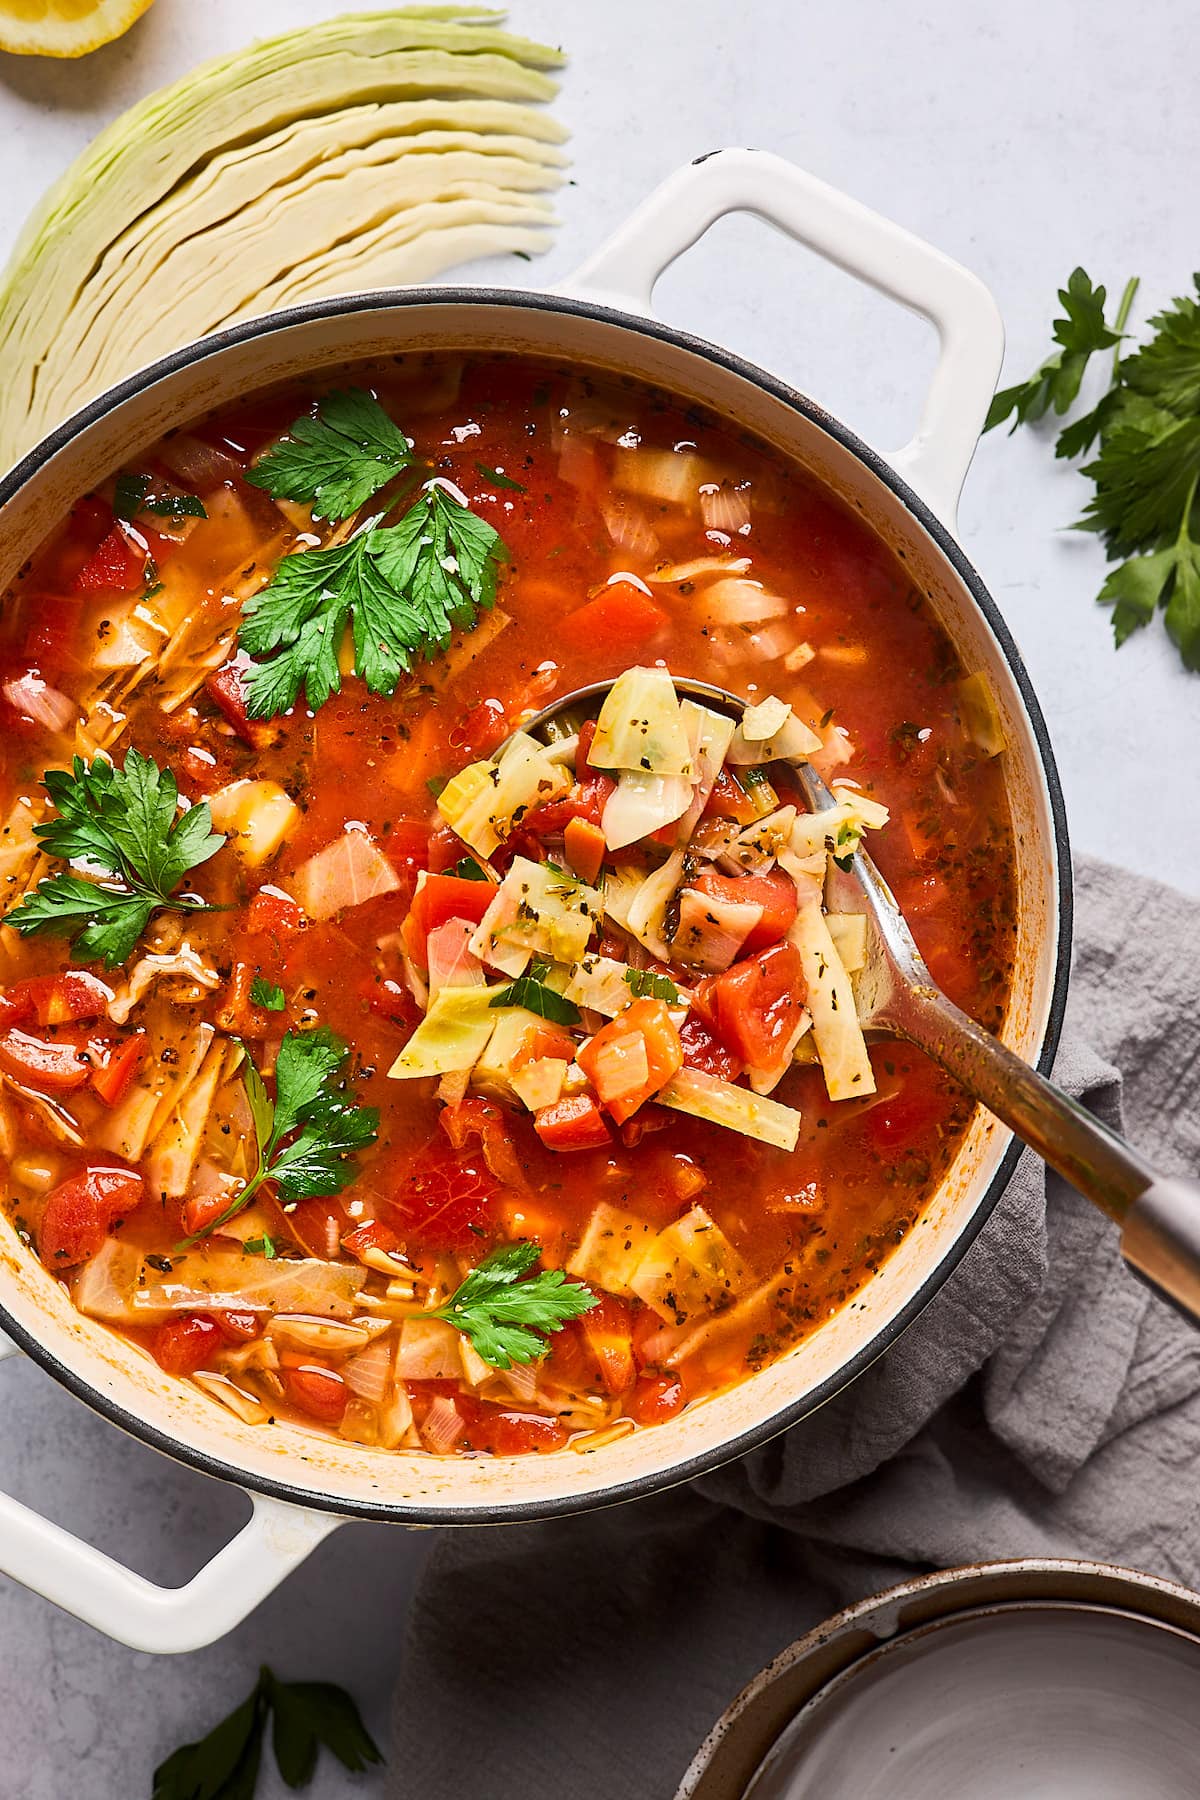 Best Recipe For Cabbage Soup Wholesale Clearance, Save 63% | jlcatj.gob.mx